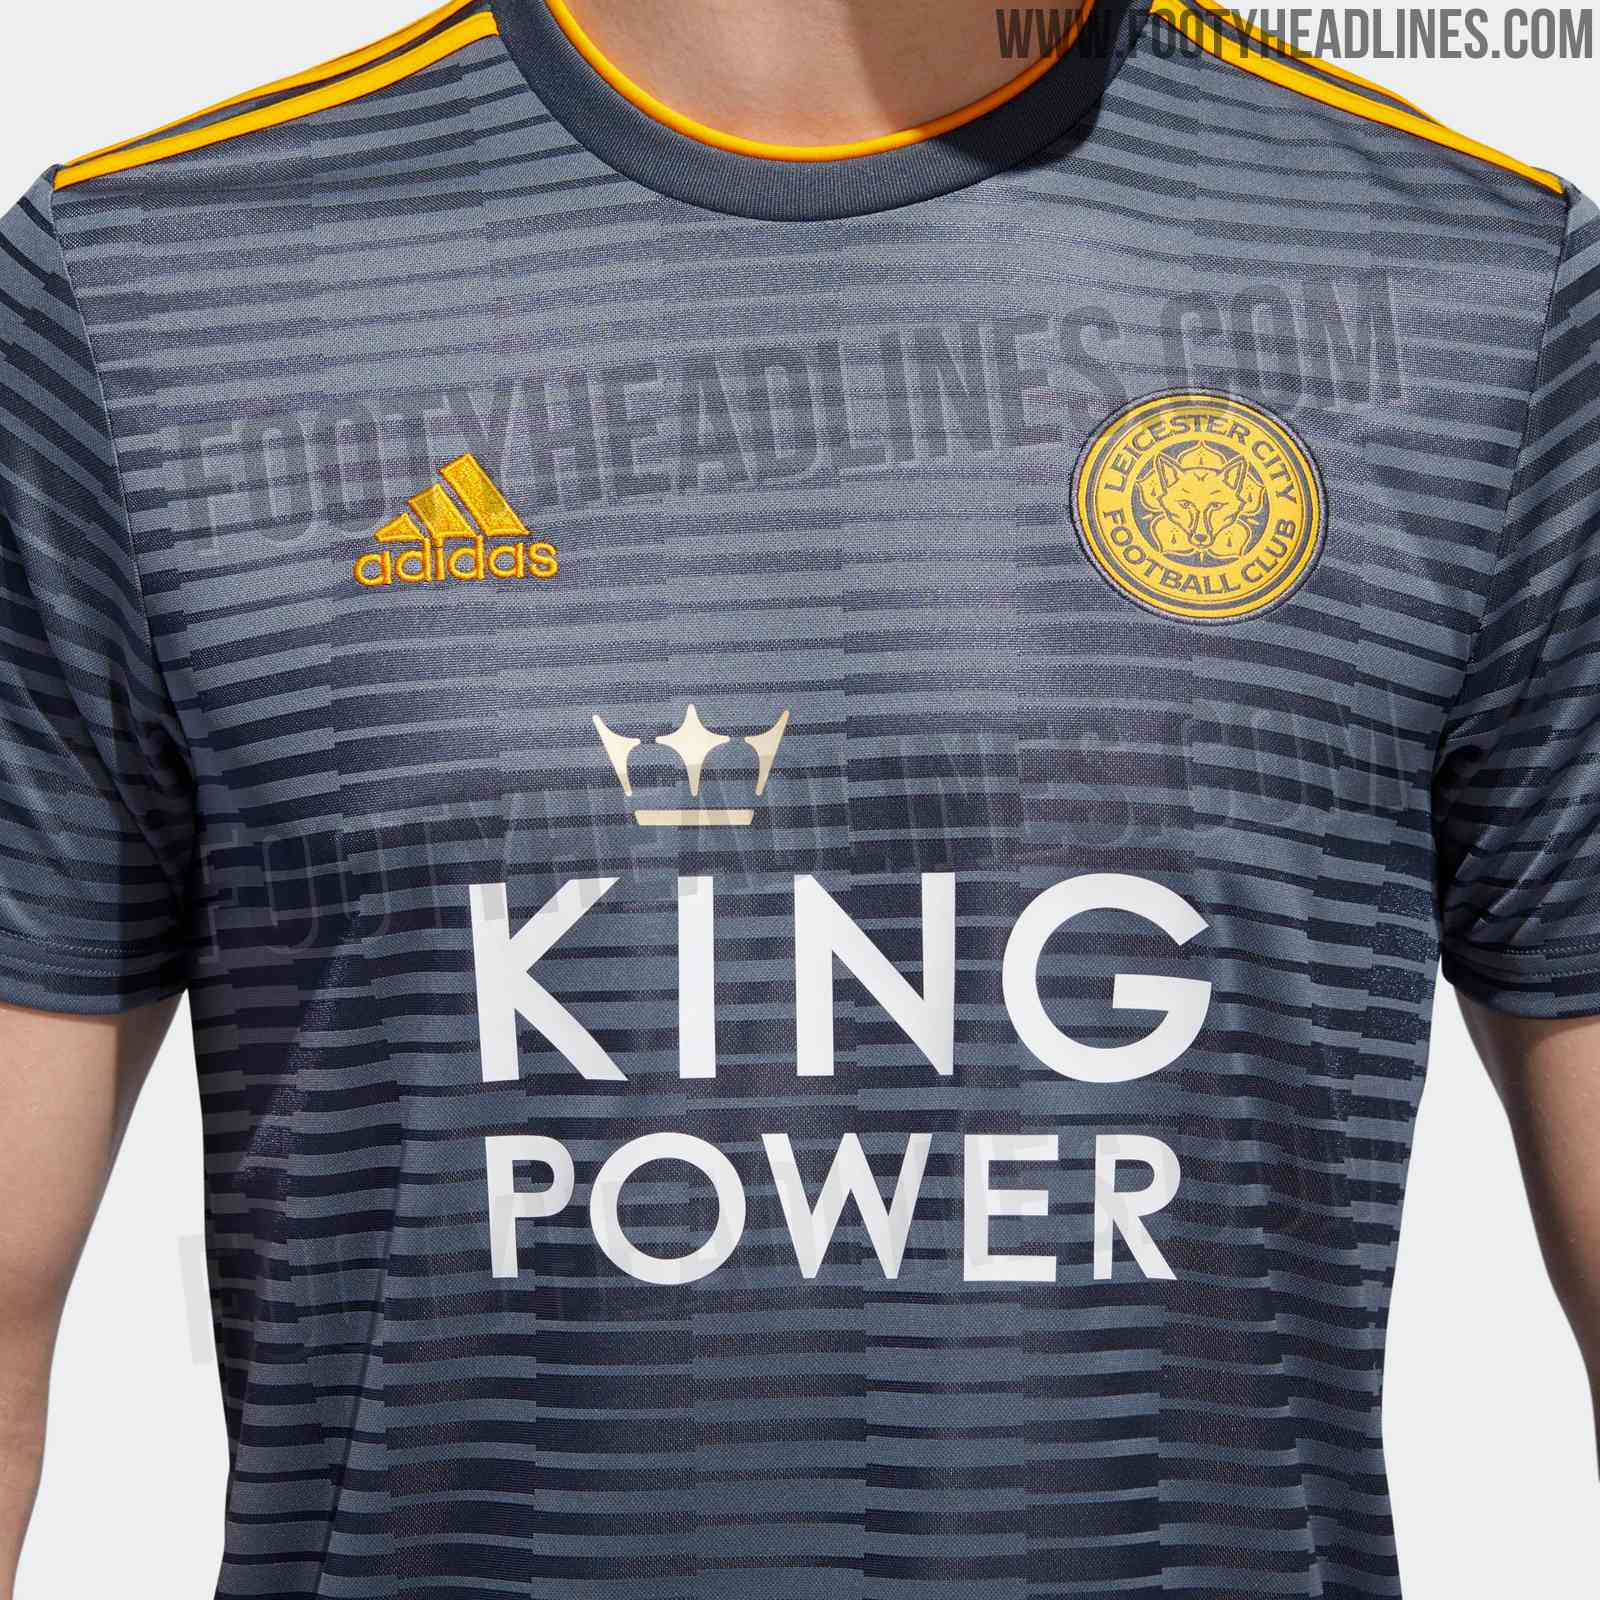 Adidas Leicester City 18-19 Away Kit Released - Footy Headlines